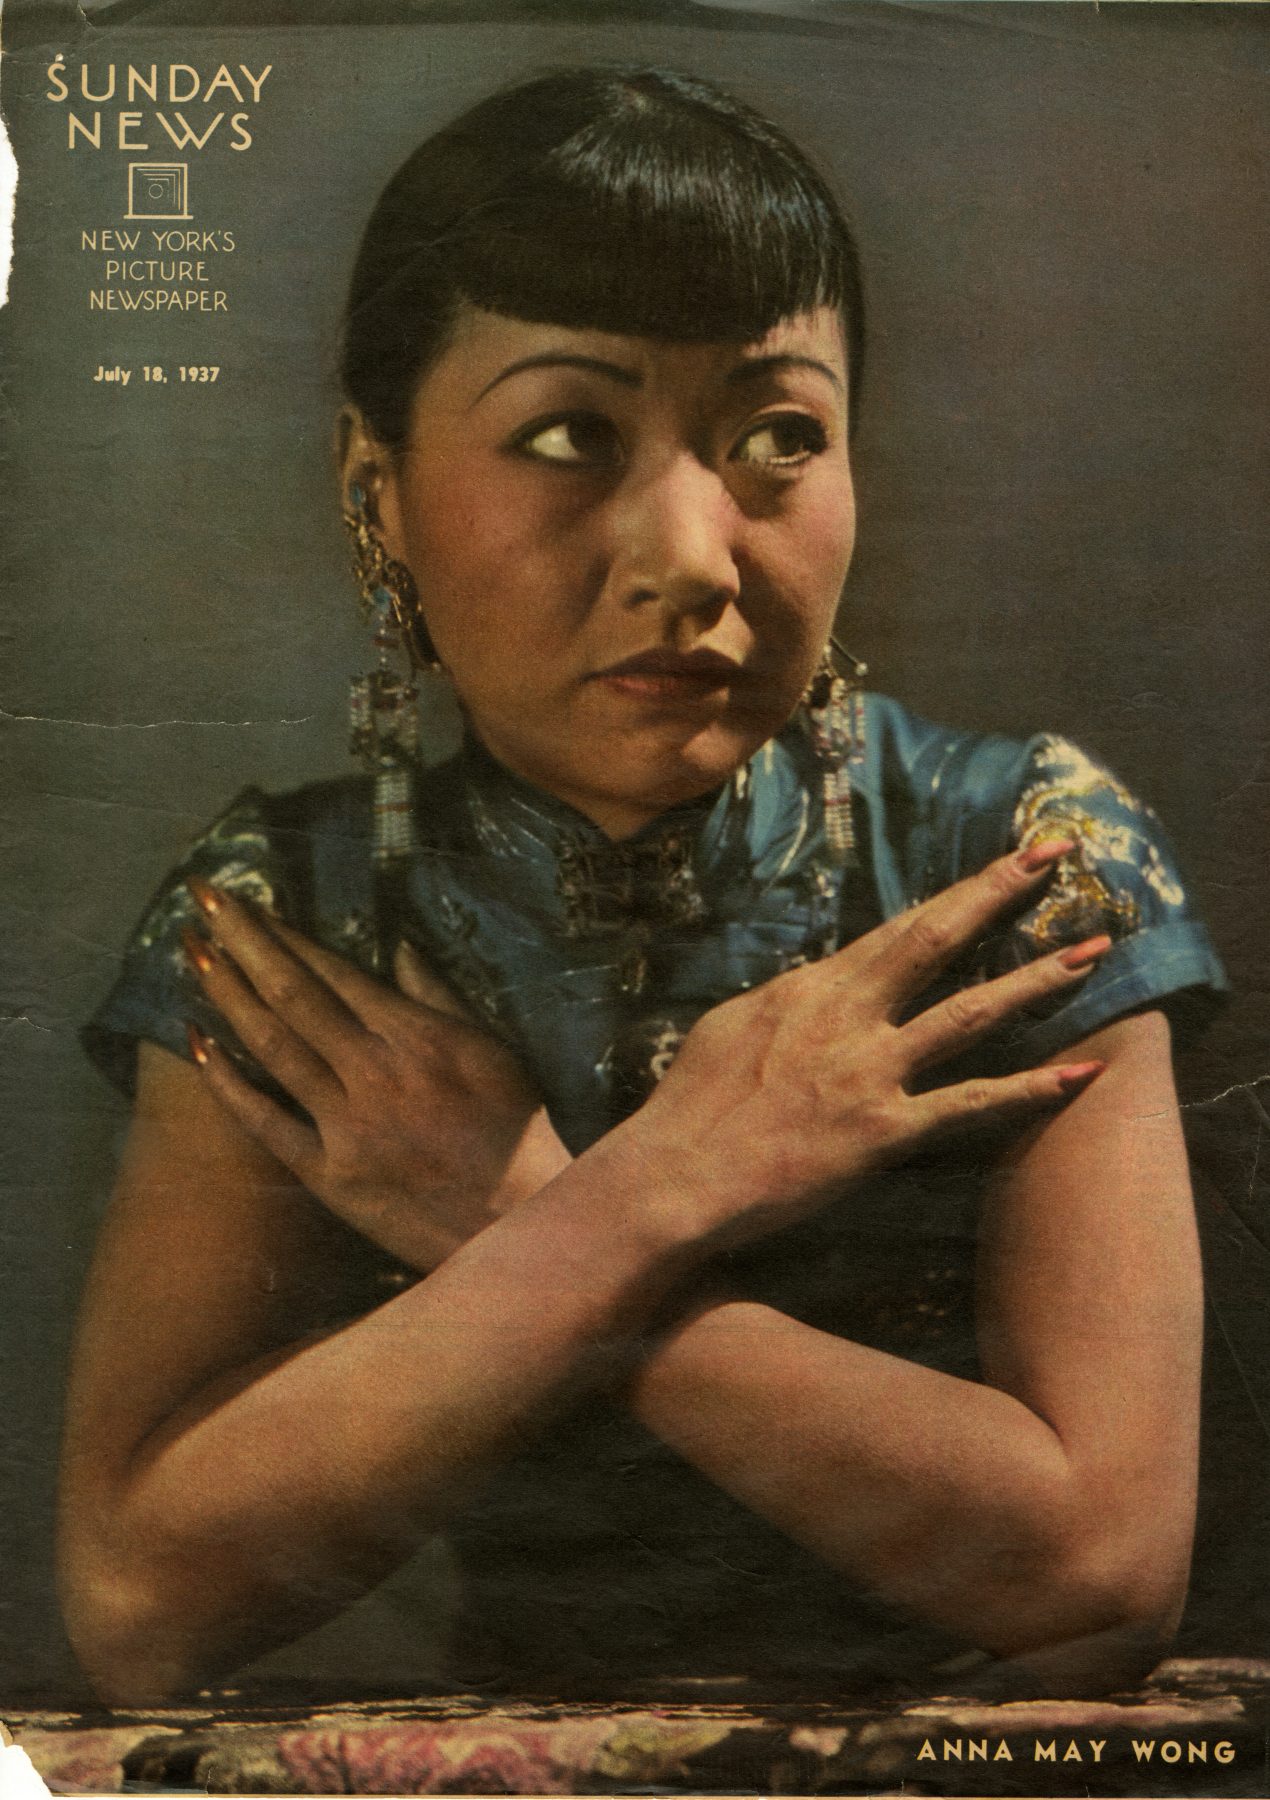 13 May 2019 Posted.
Anna May Wong on Sunday News Cover, Courtesy of Alex Jay, Museum of Chinese in America (MOCA) Collection.
黄柳霜在《星期日新闻》杂志封面，Alex Jay捐赠，美国华人博物馆（MOCA）馆藏